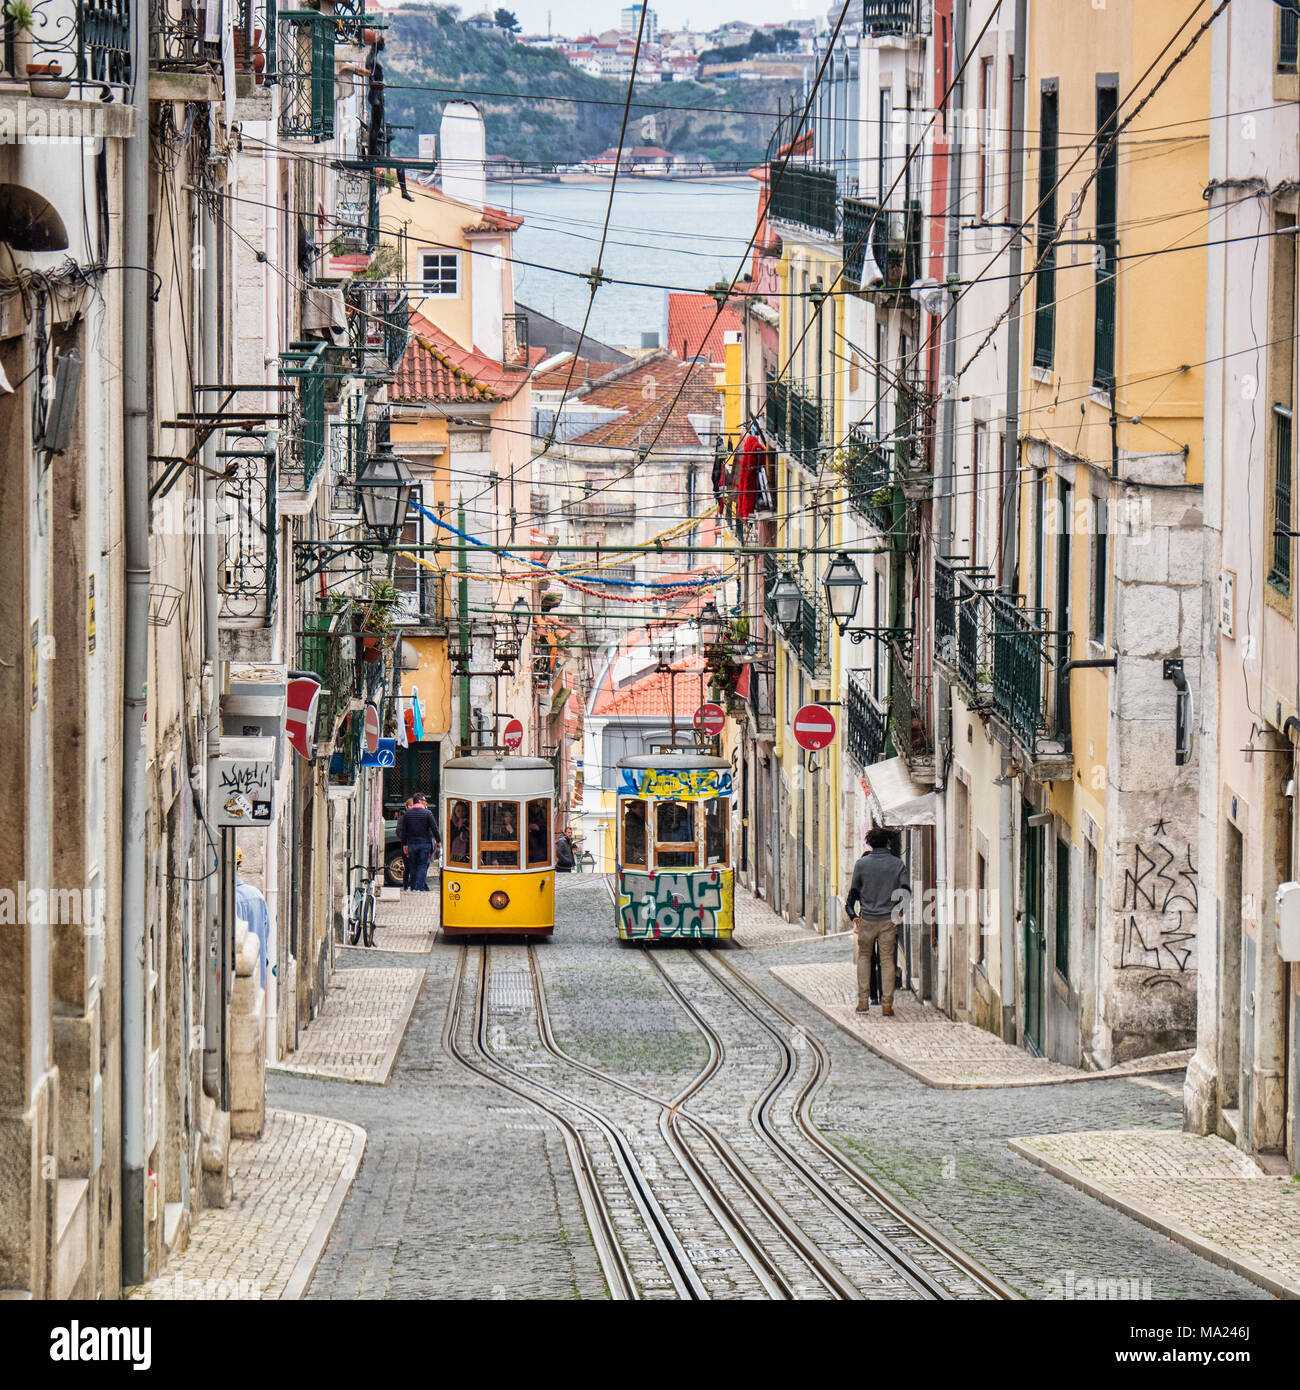 7 March 2018: Lisbon Portugal - The Bica Lift, or Elevador da Bica, in the Misericordia district, a funicular railway line. Here the two trams pass ea Stock Photo